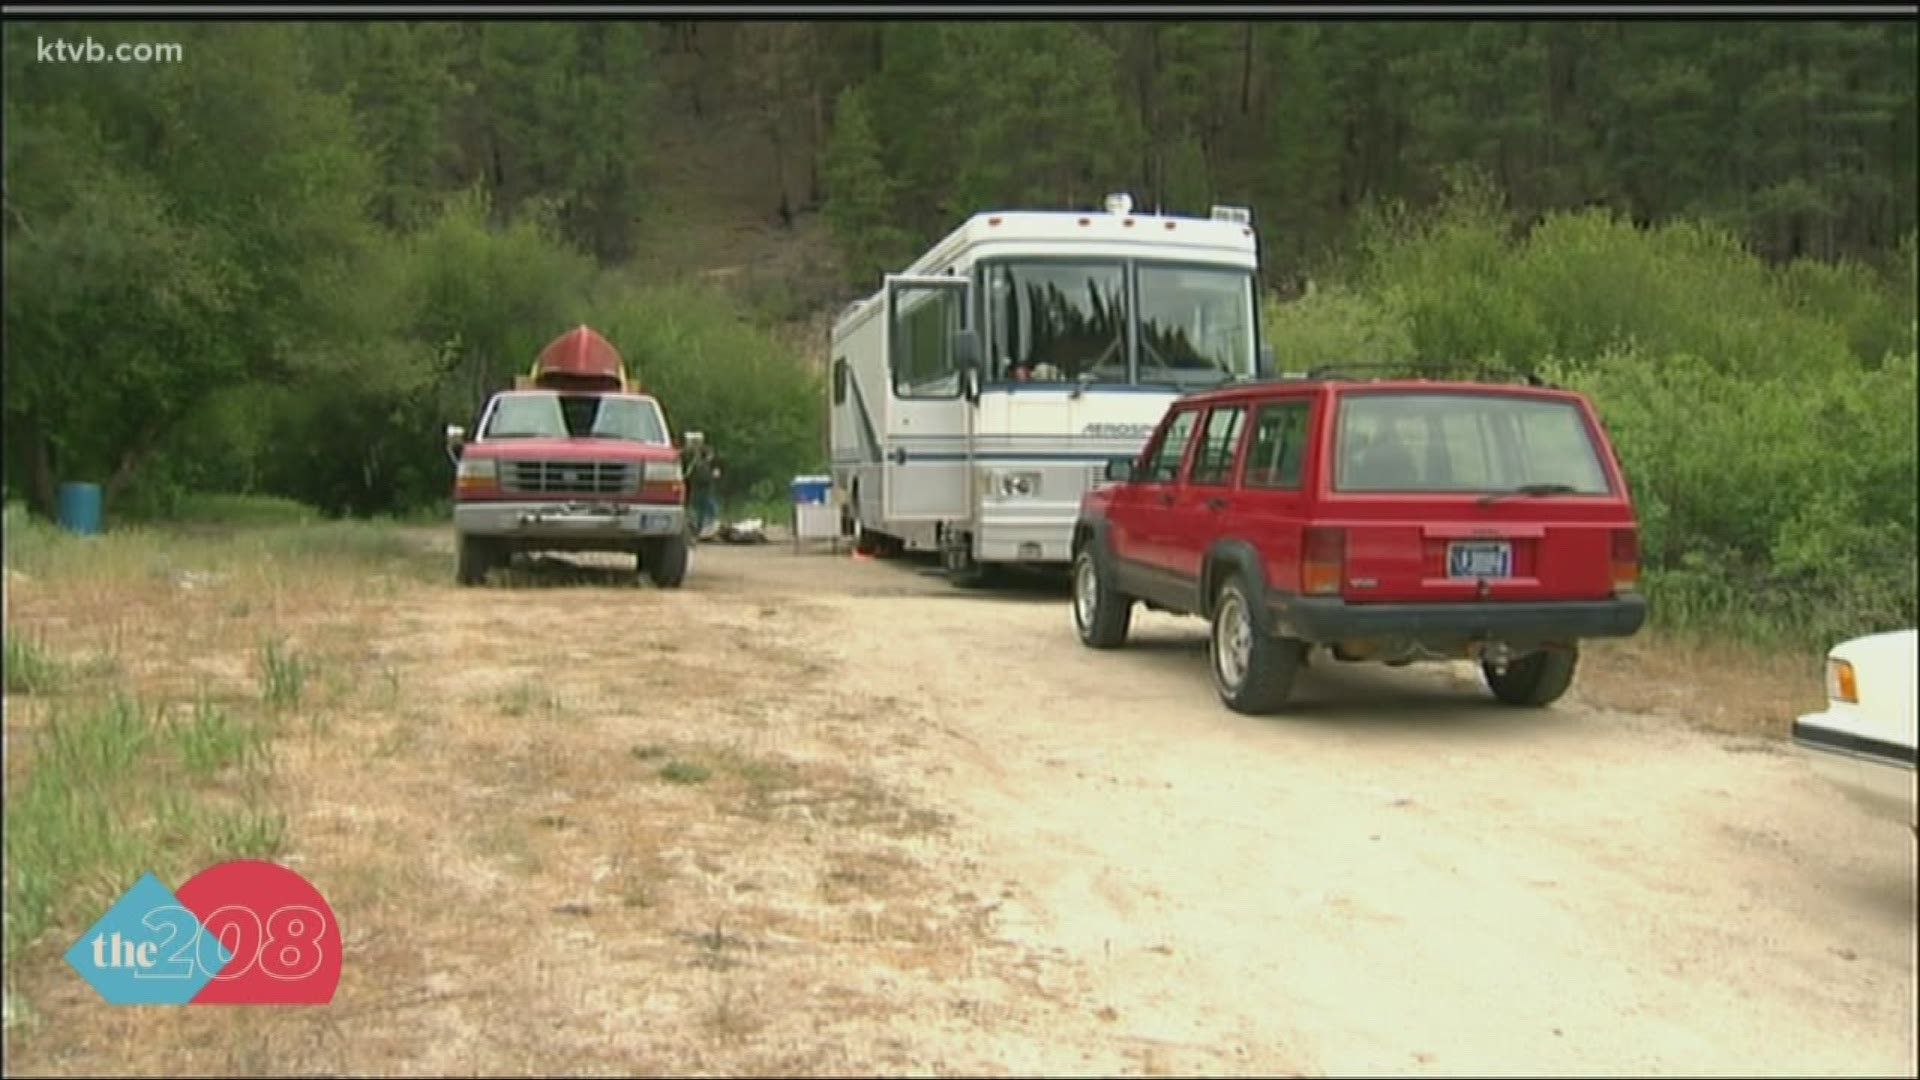 A majority of public campgrounds across the state have been closed since mid-March because of the pandemic. Some of them are opening back up.